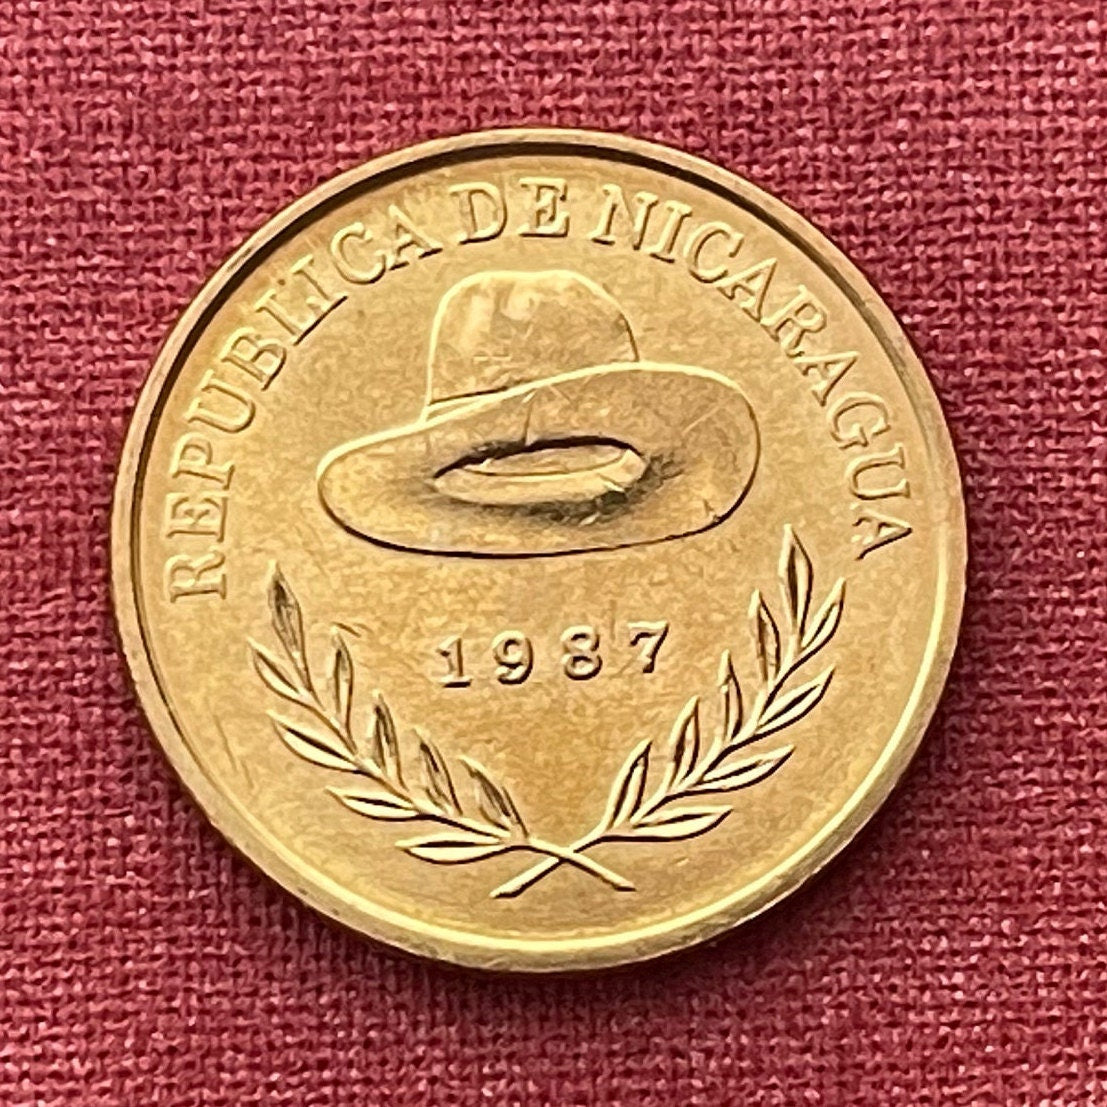 Augusto Sandino's Hat 50 Centavos Nicargua Authentic Coin Money for Jewelry (Vaquero Hat) (Revolutionary Leader) (Broad-Brimmed Hat) 1987